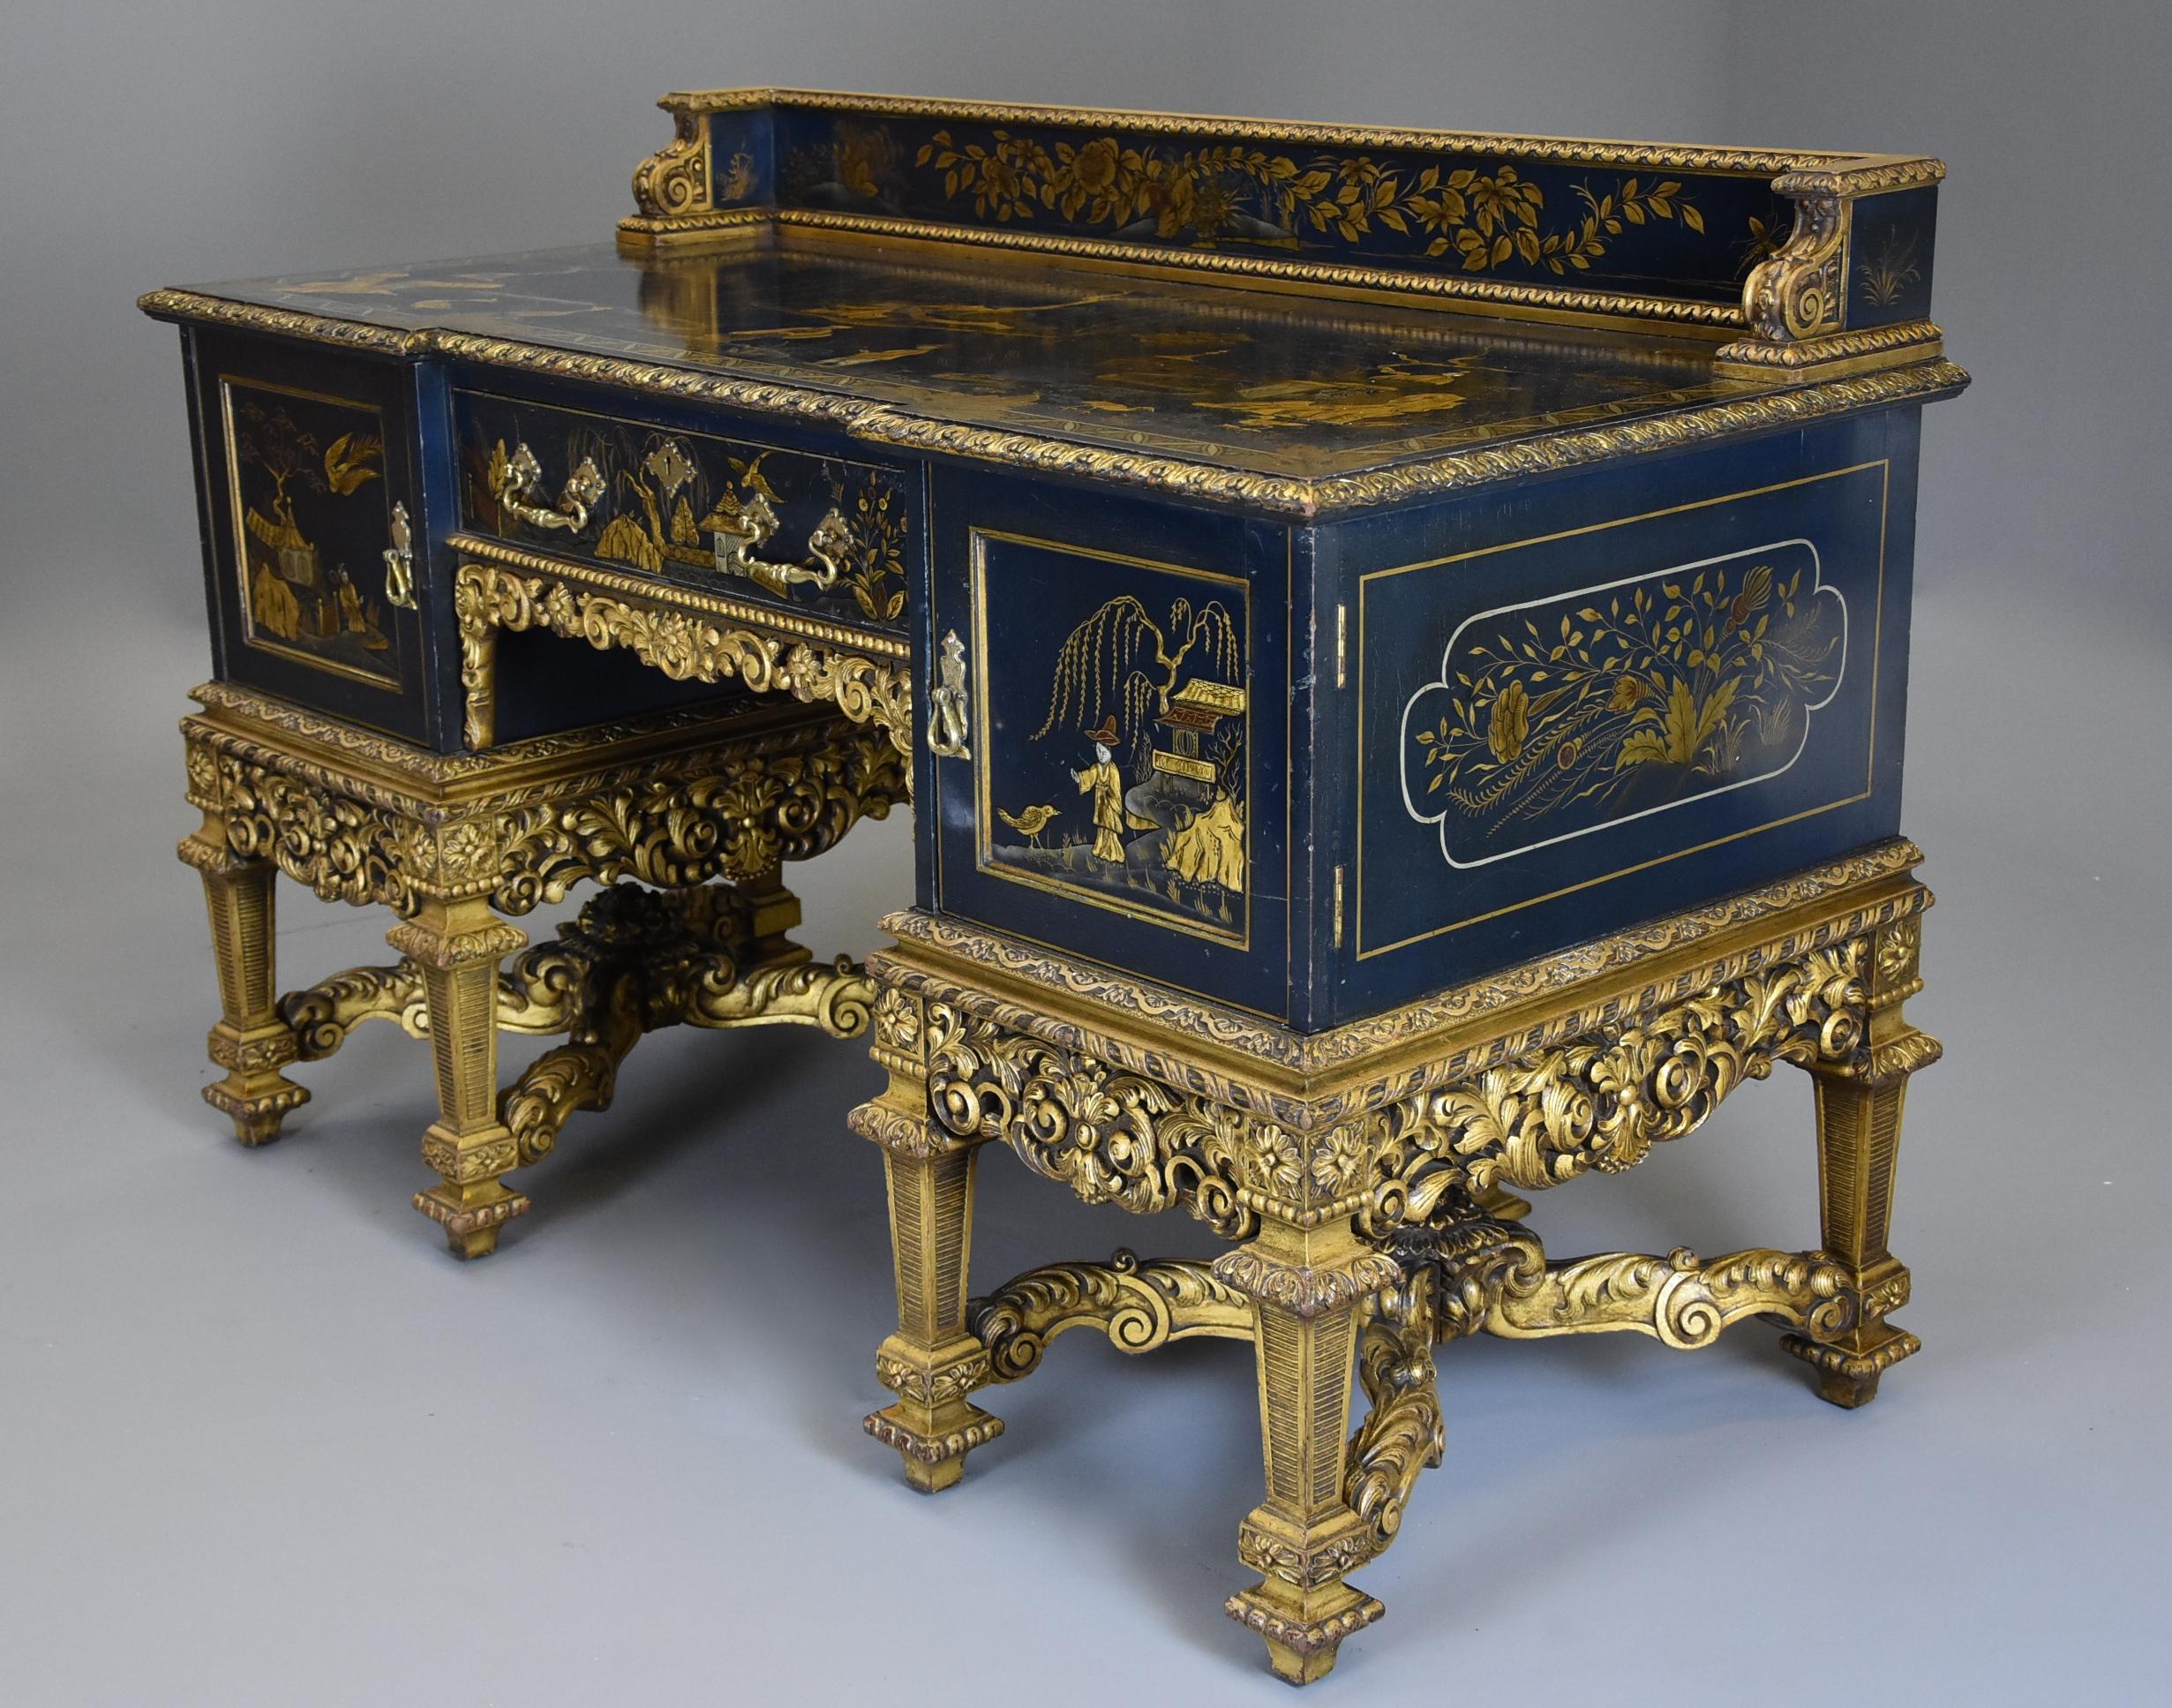 Giltwood Superb Highly Decorative Charles II Style Blue & Gilt Chinoiserie Dressing Table